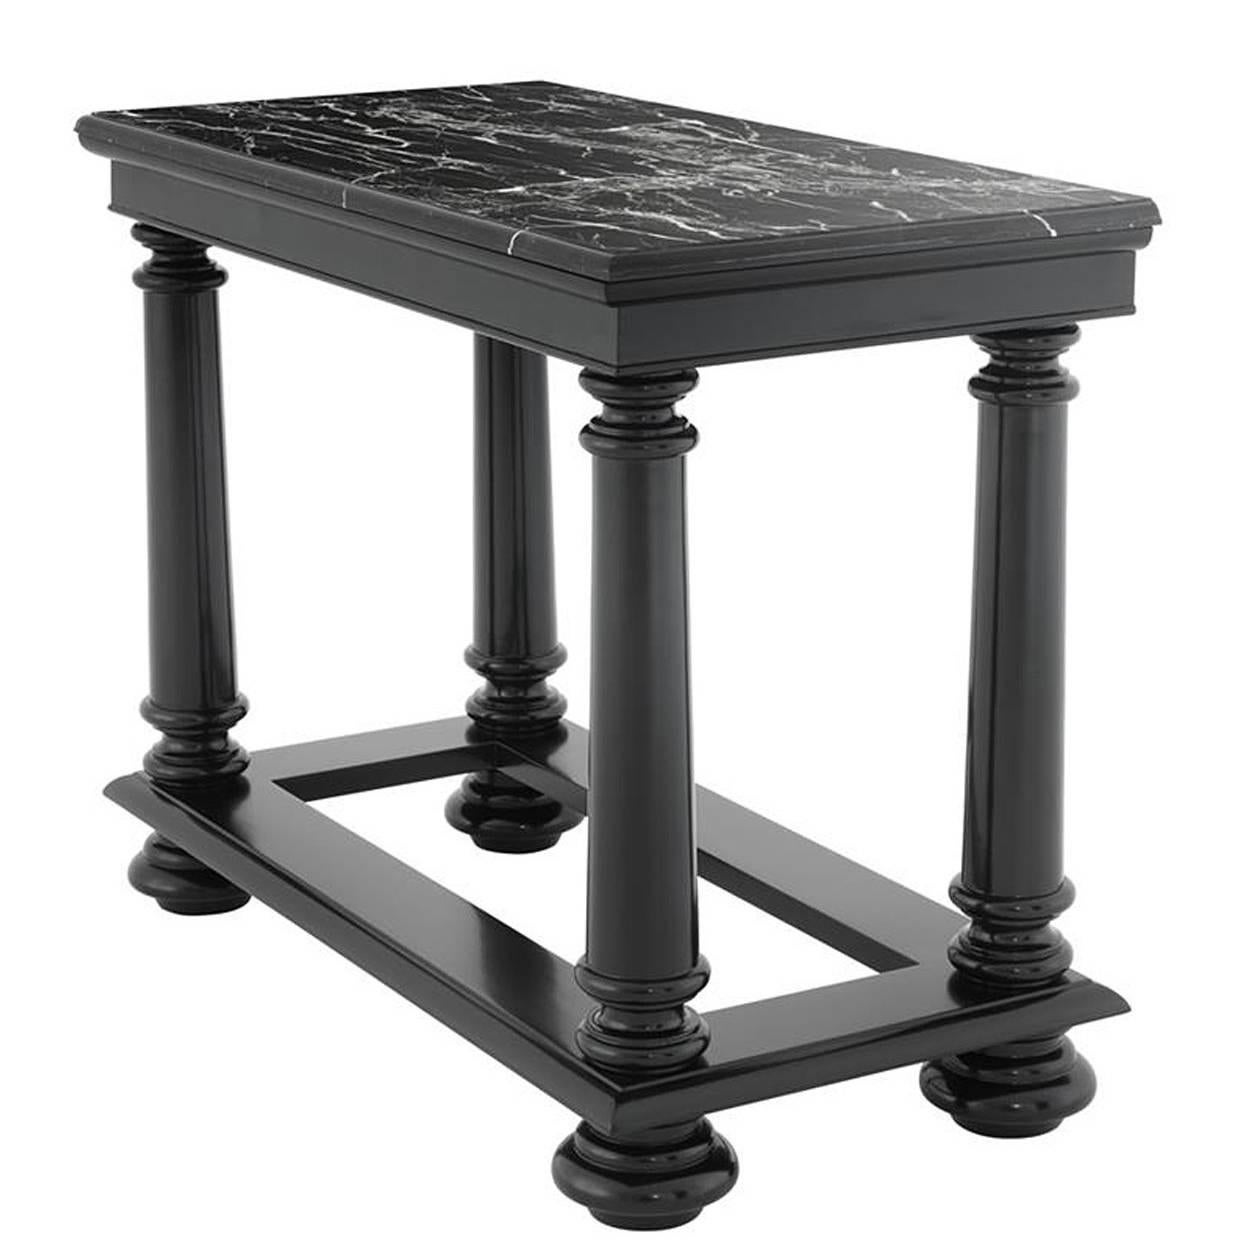 Harth Medium Console Table in Solid Mahogany Wood with Marble Top